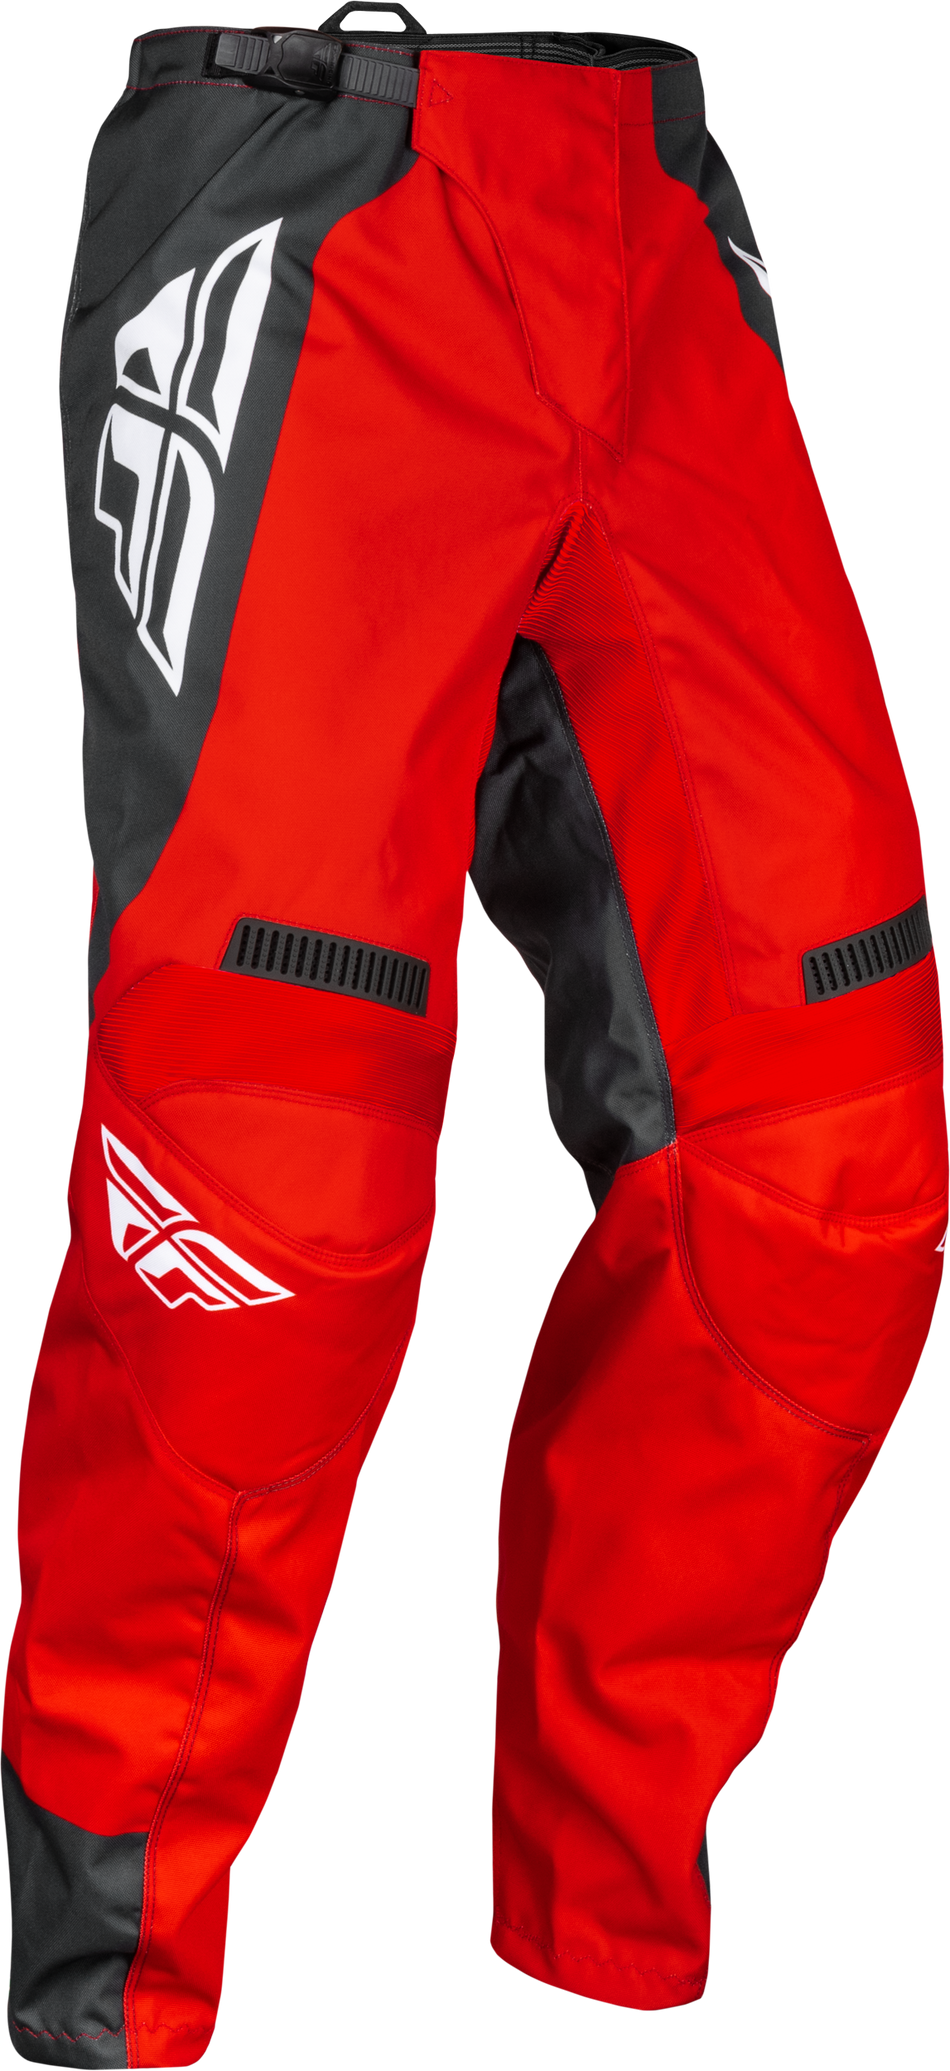 FLY RACING F-16 Pants Red/Charcoal/White Sz 36 377-93336